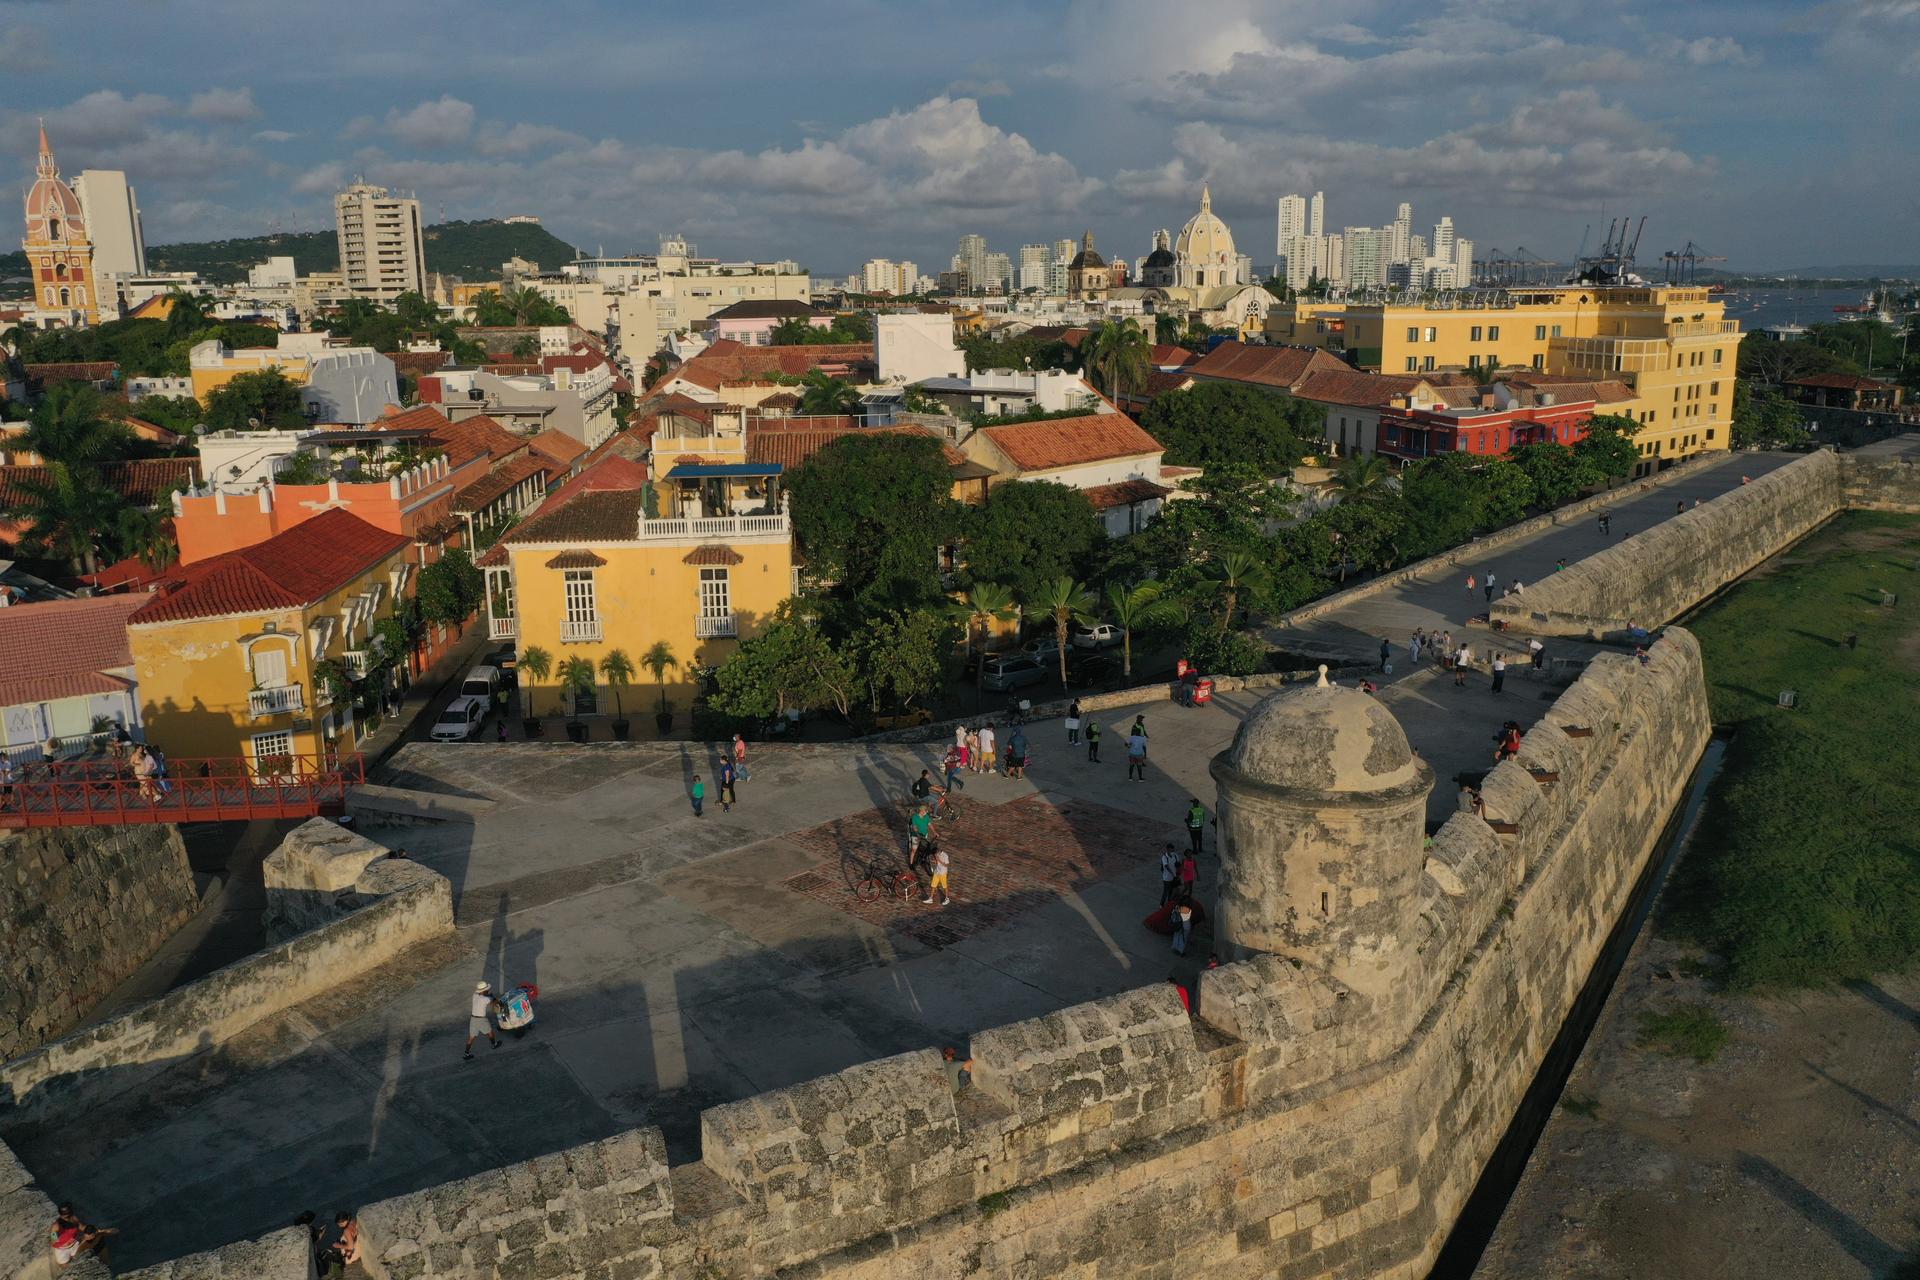 Cartagena's historical center is a UNESCO World Heritage site, and contains some of the best preserved examples of 18th century military architecture in the Caribbean